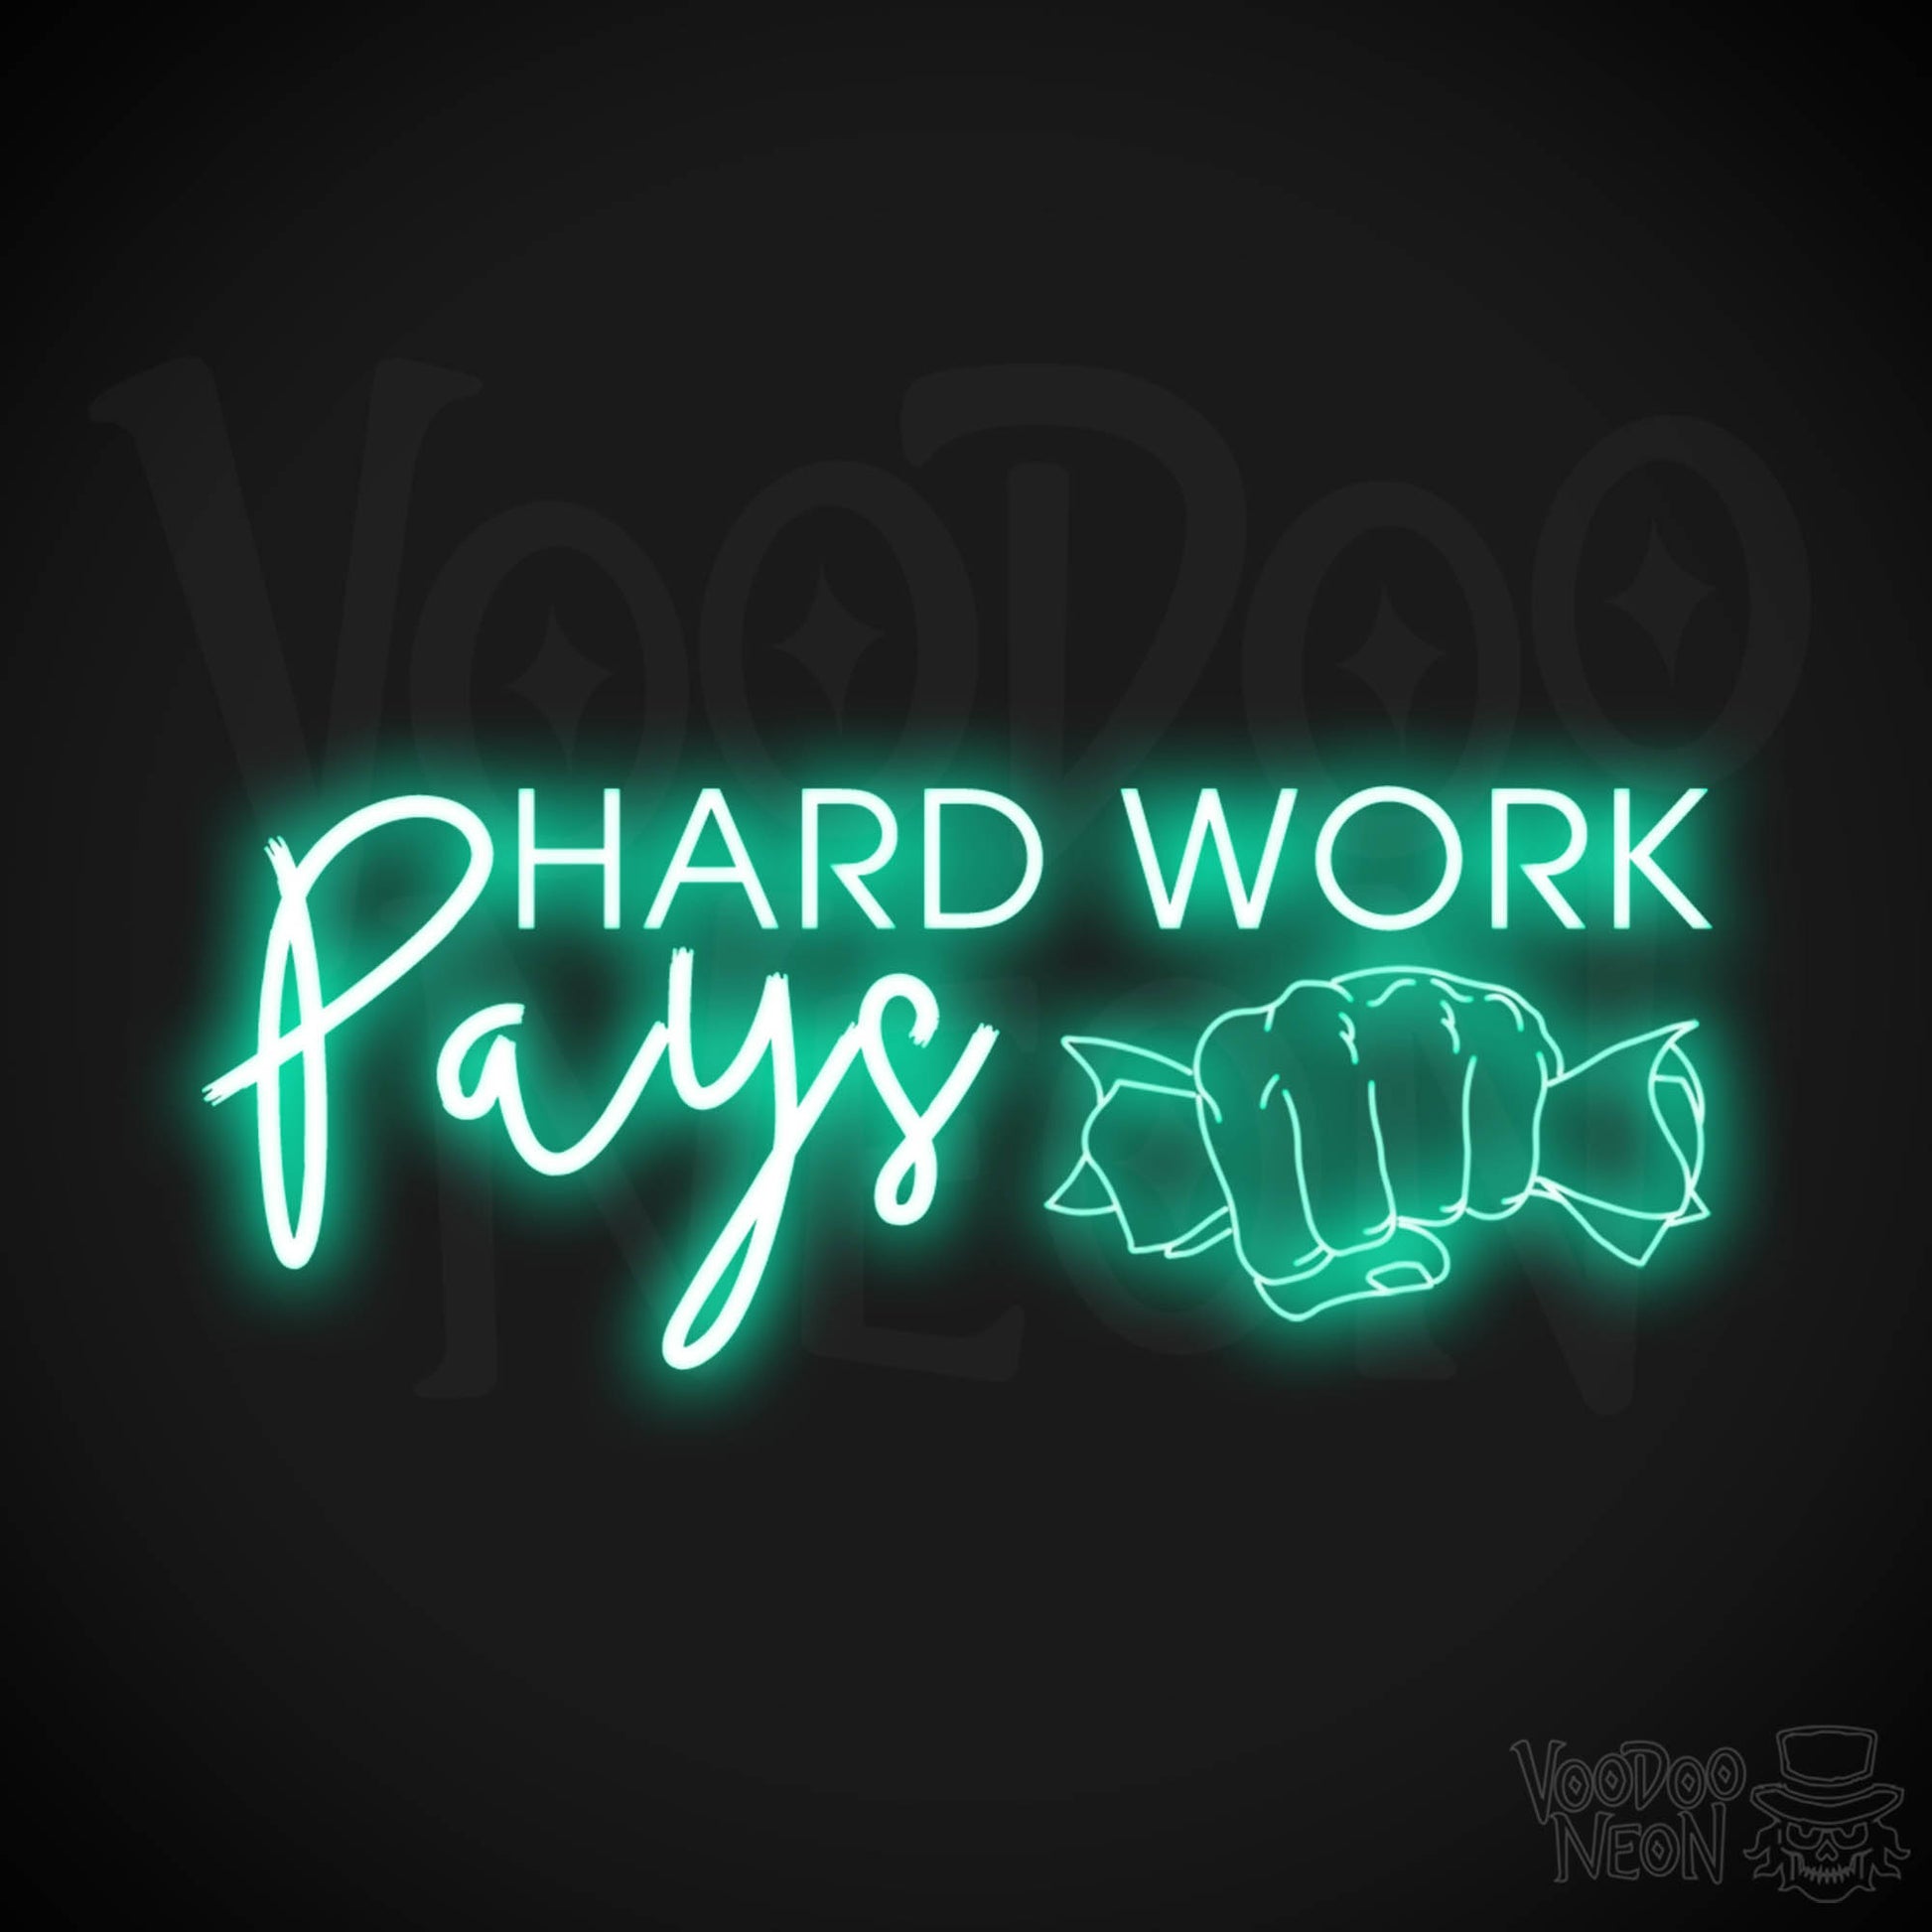 Hard Work Pays Neon Sign - LED Neon Wall Art - Color Light Green